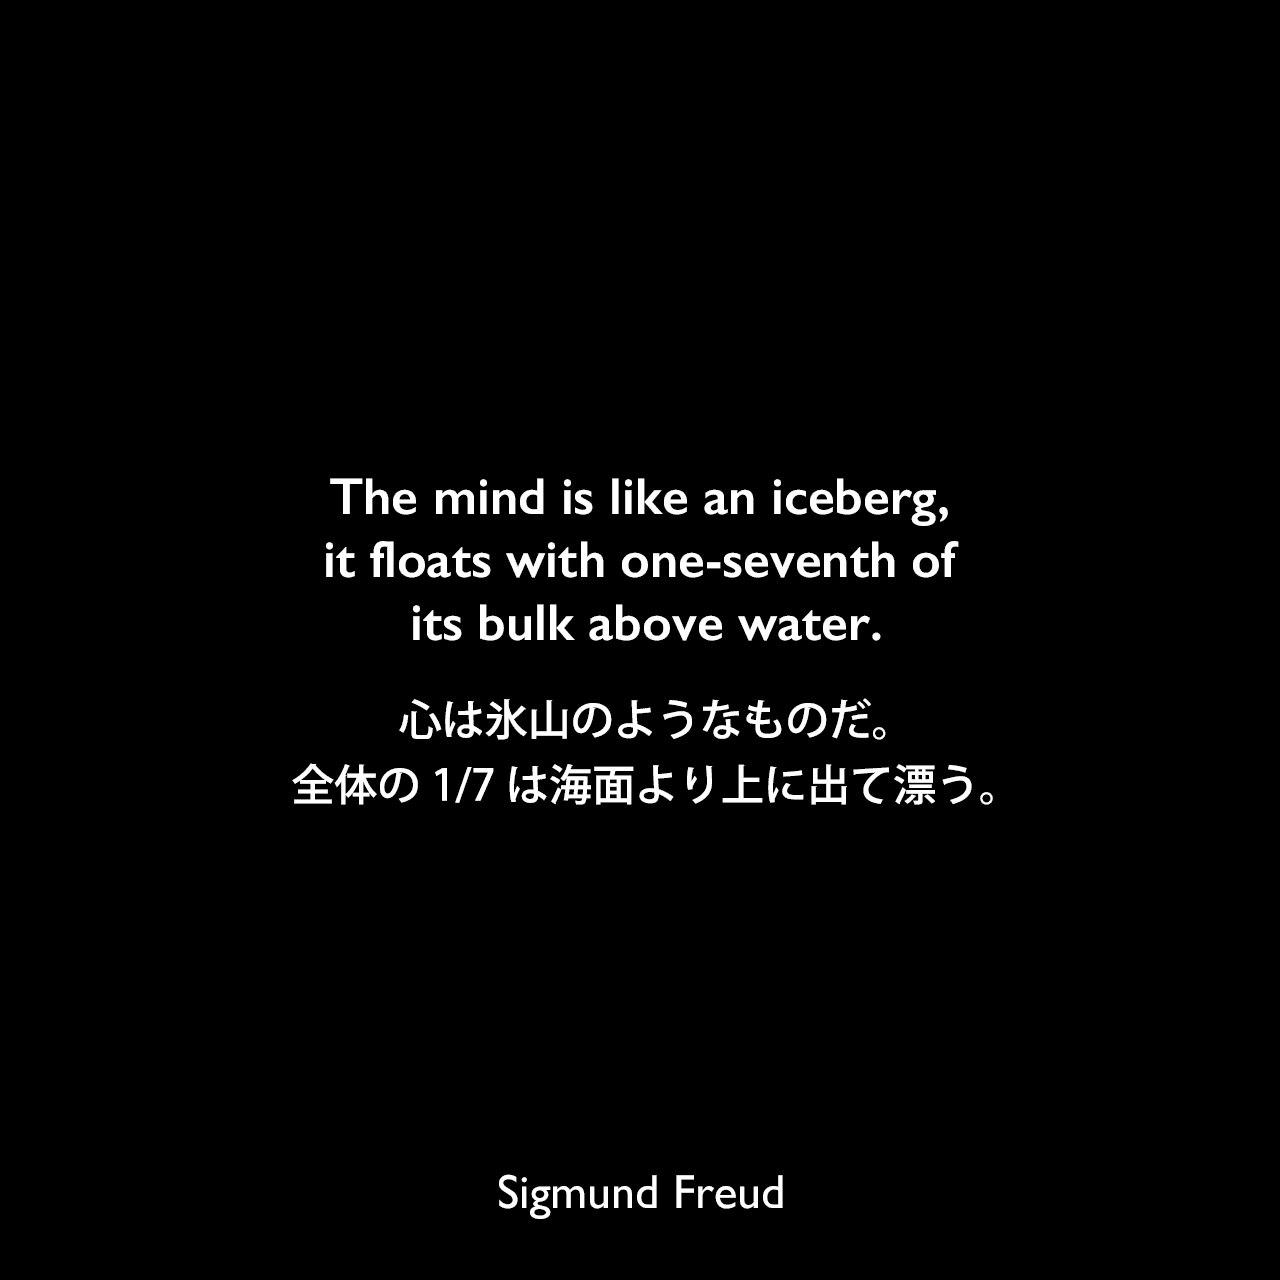 The mind is like an iceberg, it floats with one-seventh of its bulk above water.心は氷山のようなものだ。全体の1/7は海面より上に出て漂う。Sigmund Freud